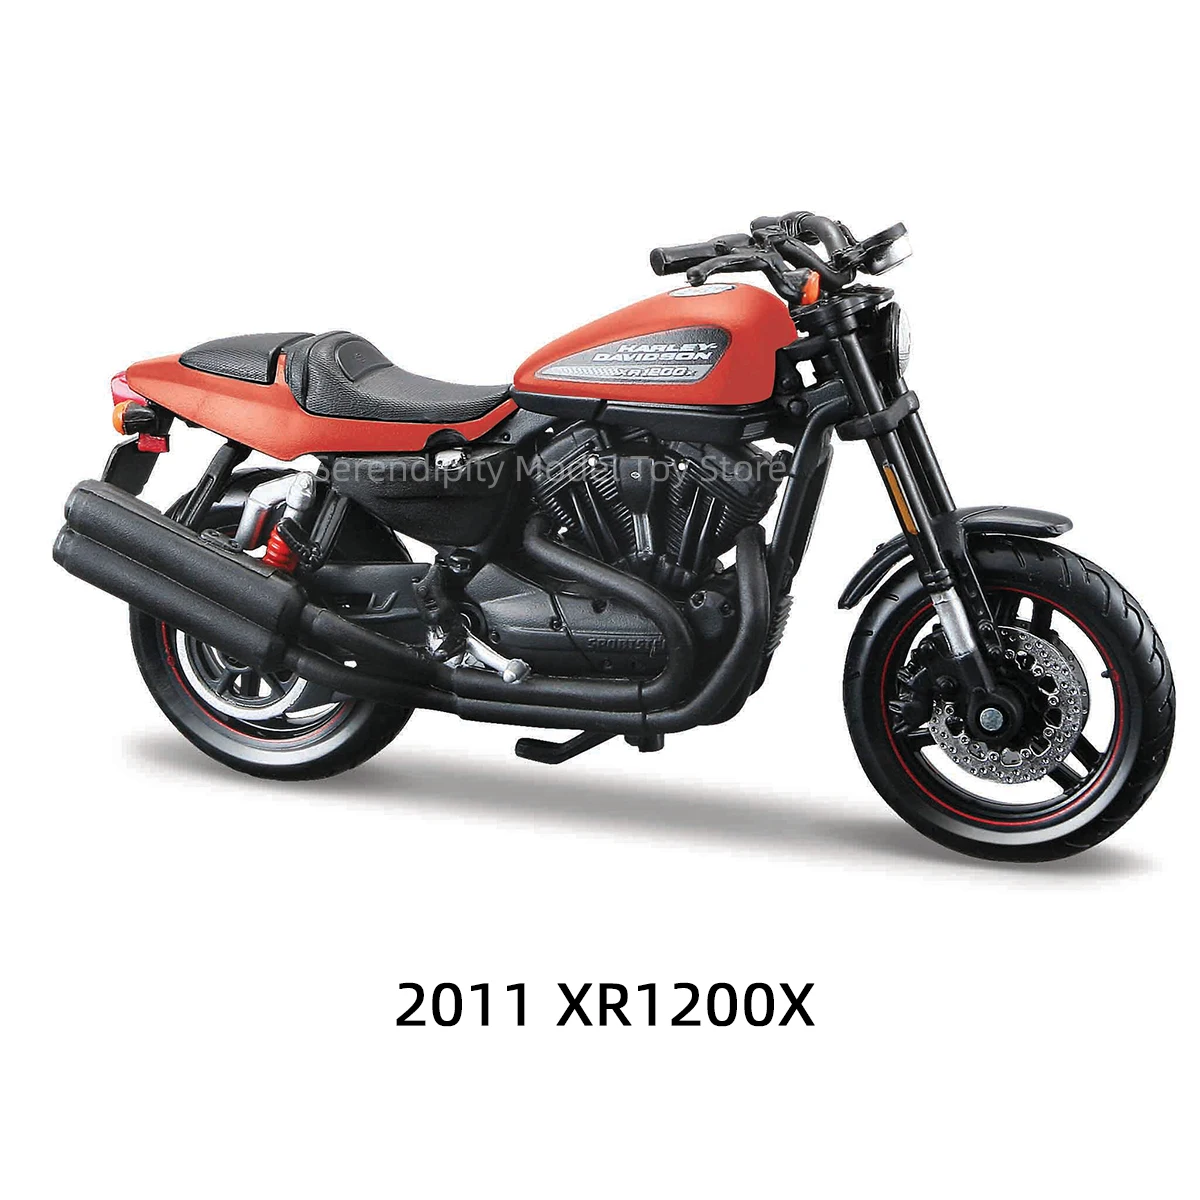 Maisto 1:18 Harley-Davidson 2011 XR 1200X Die Cast Vehicles Collectible Hobbies Motorcycle Model Toys